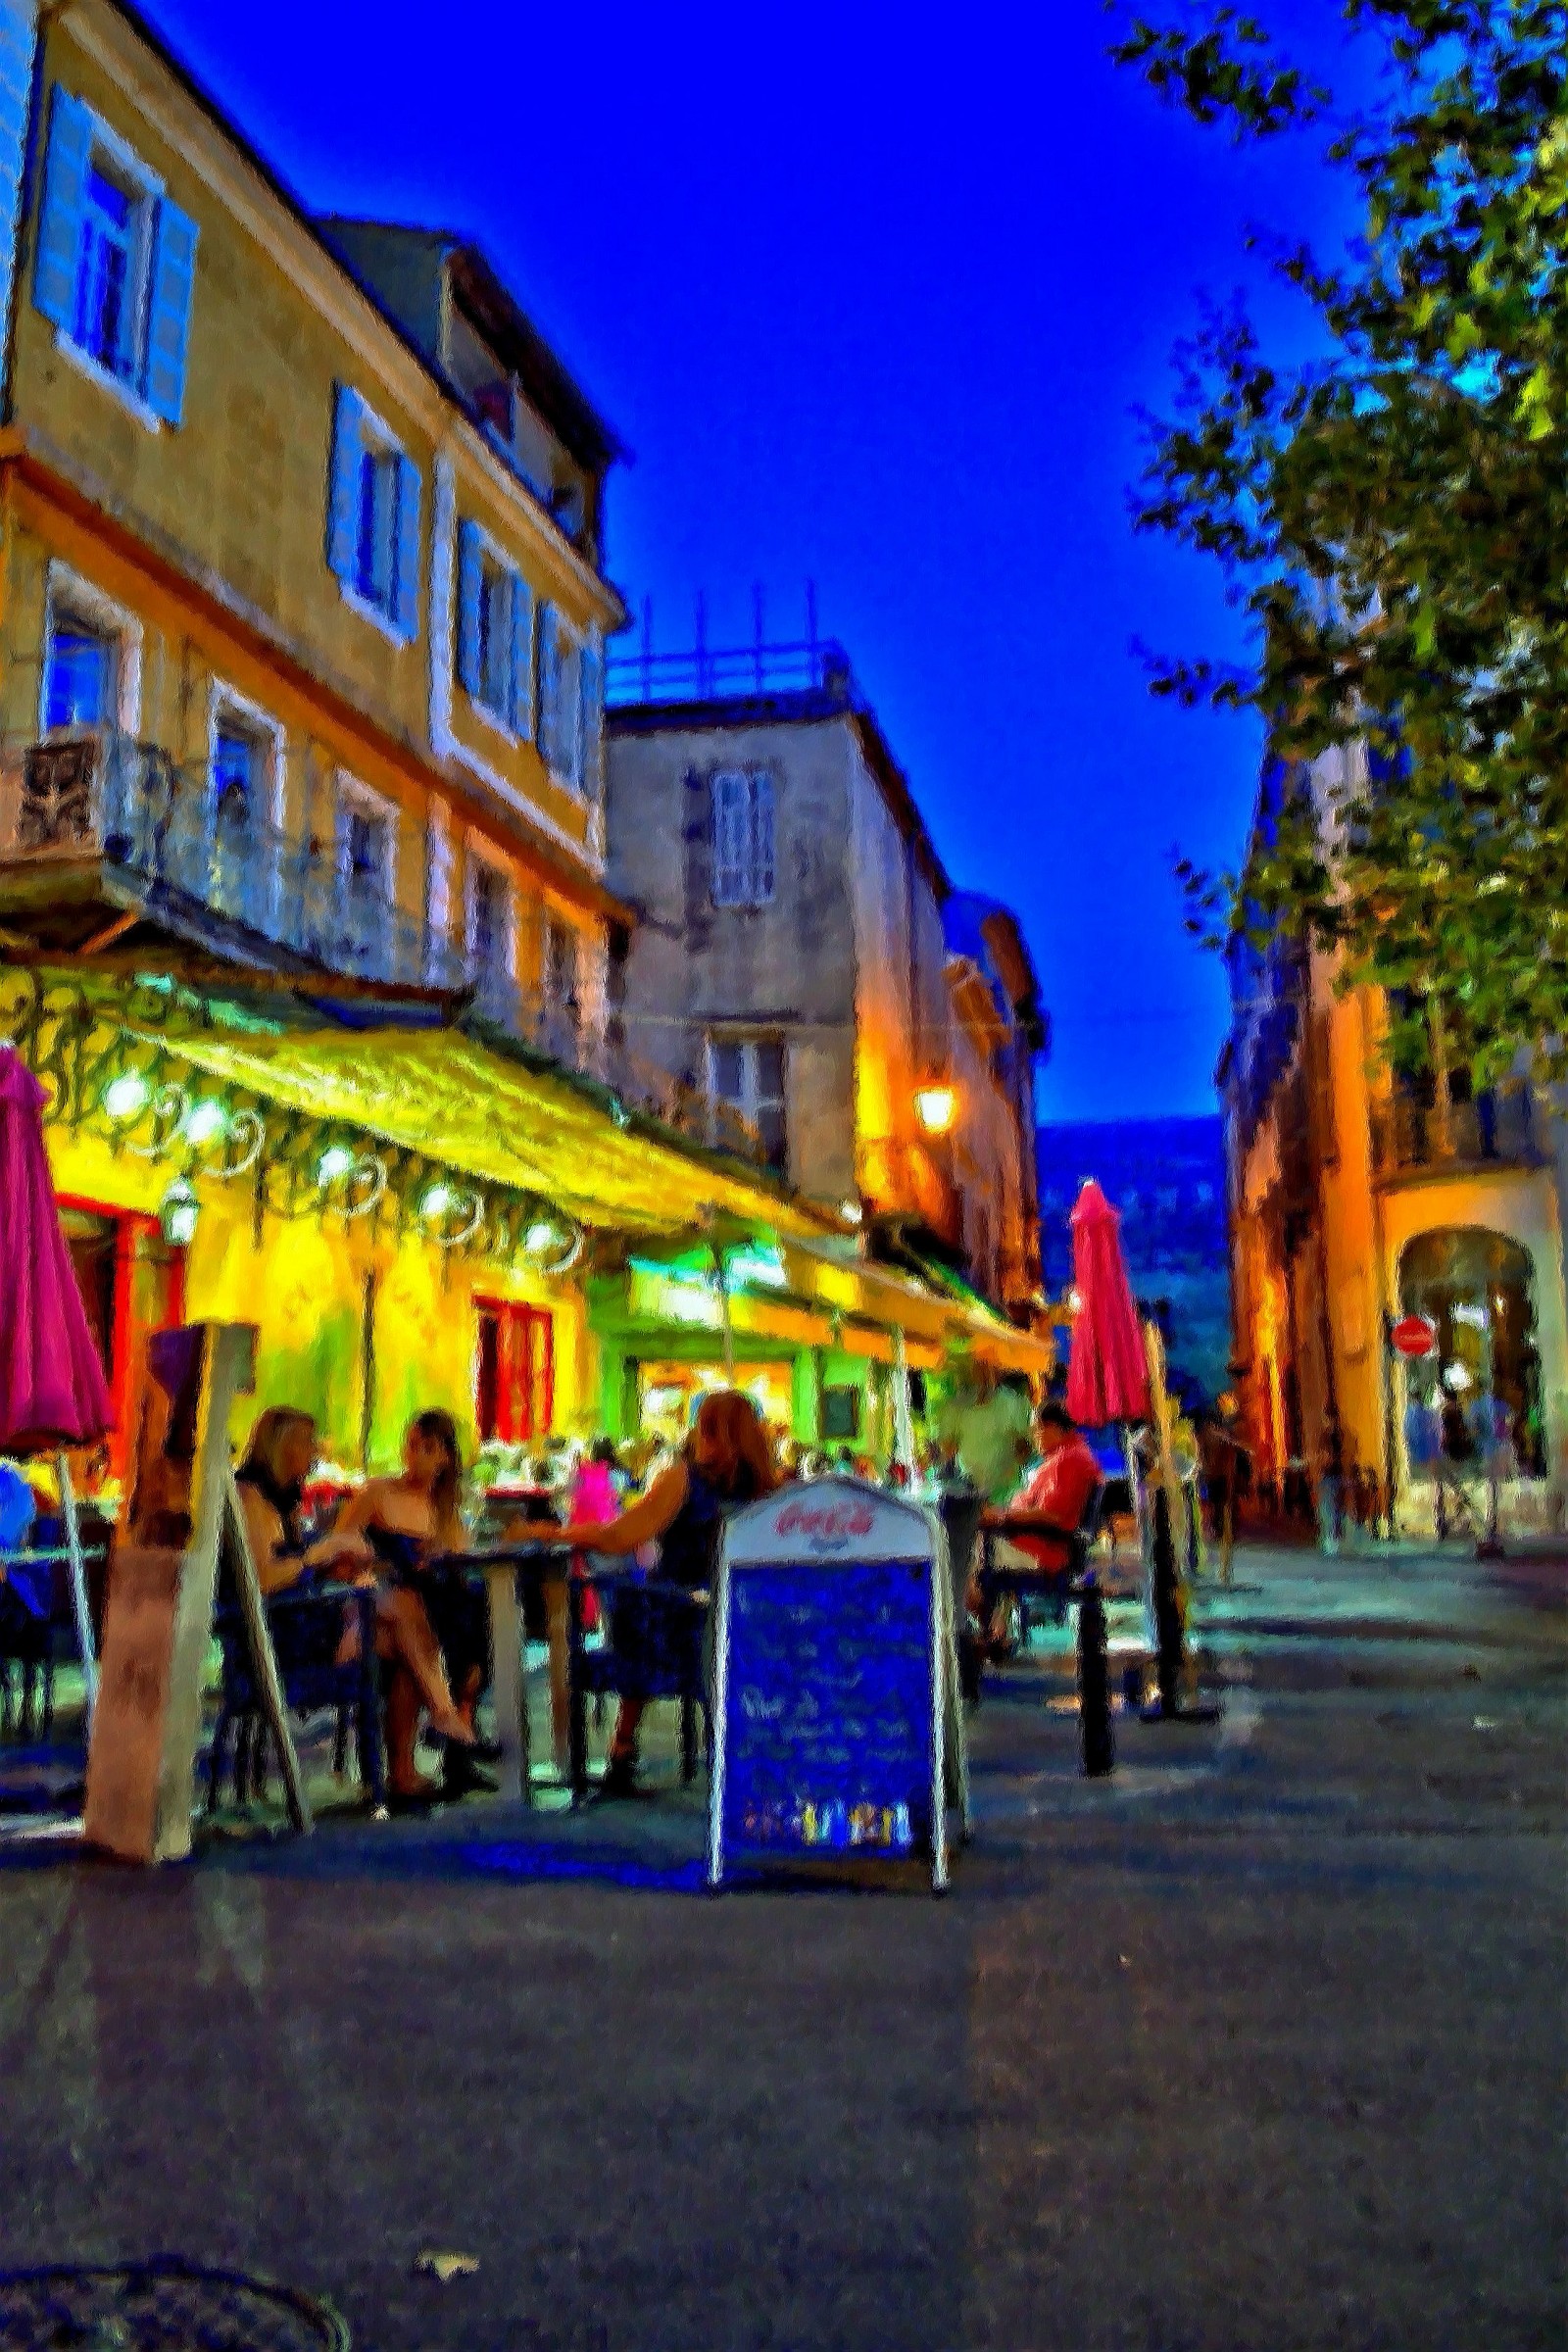 Cafe Terrace at Night (Place du Forum, Arles)...